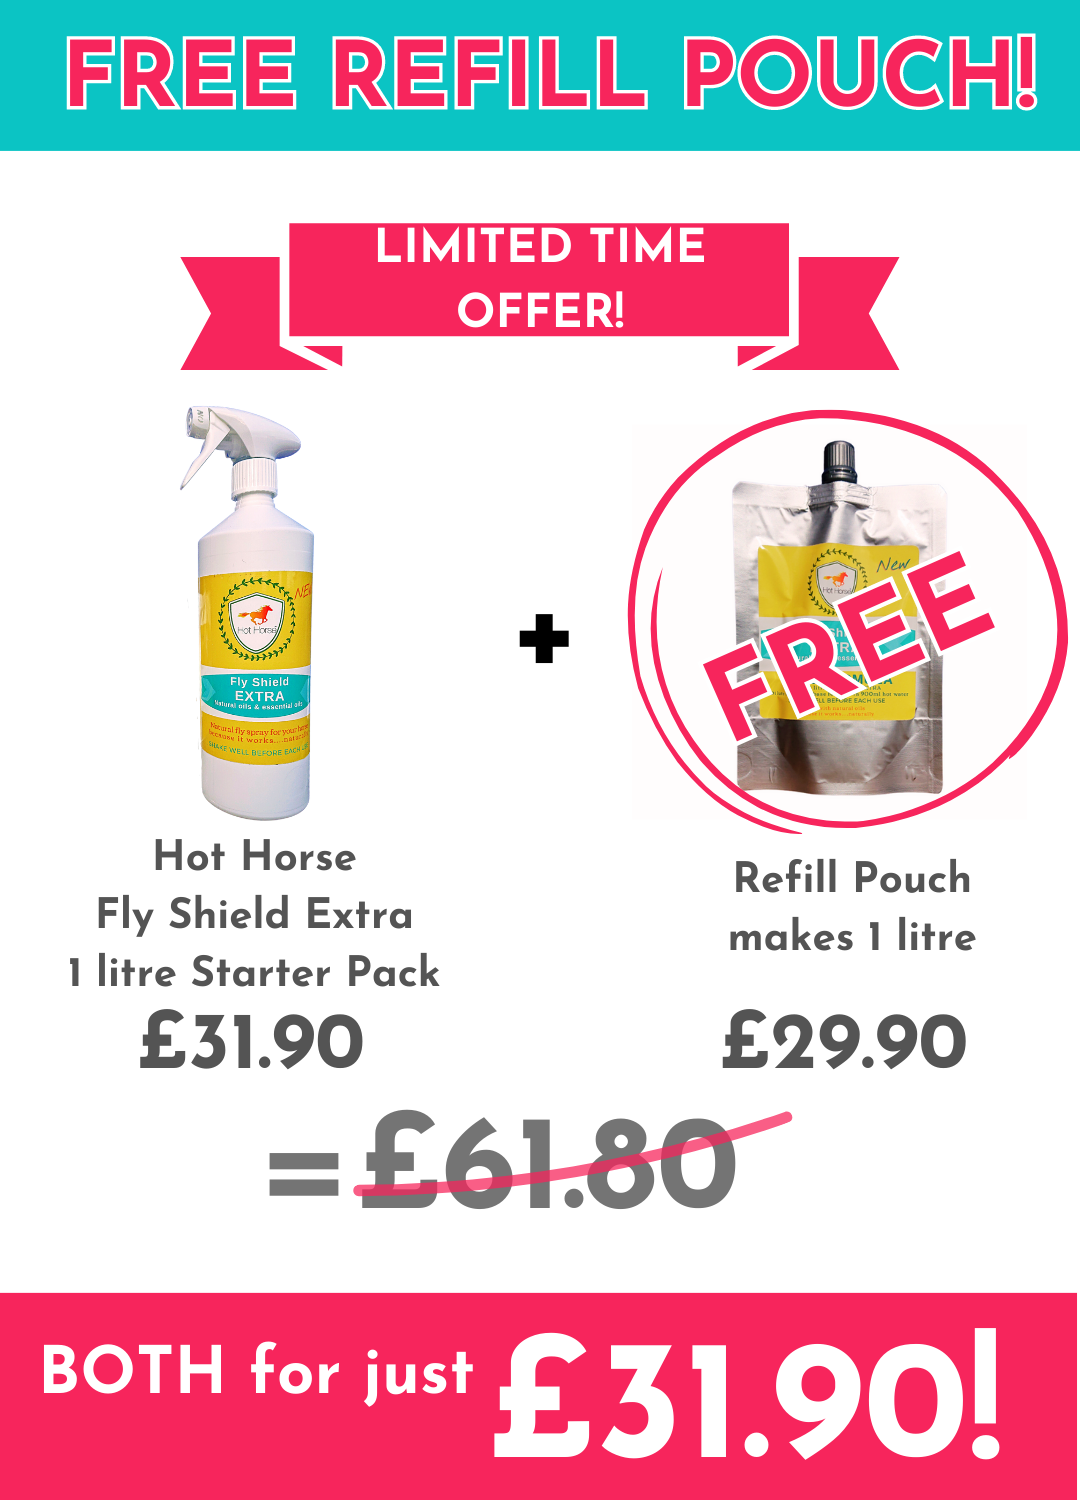 Hot Horse Fly Shield Extra with Free refill pouch offer